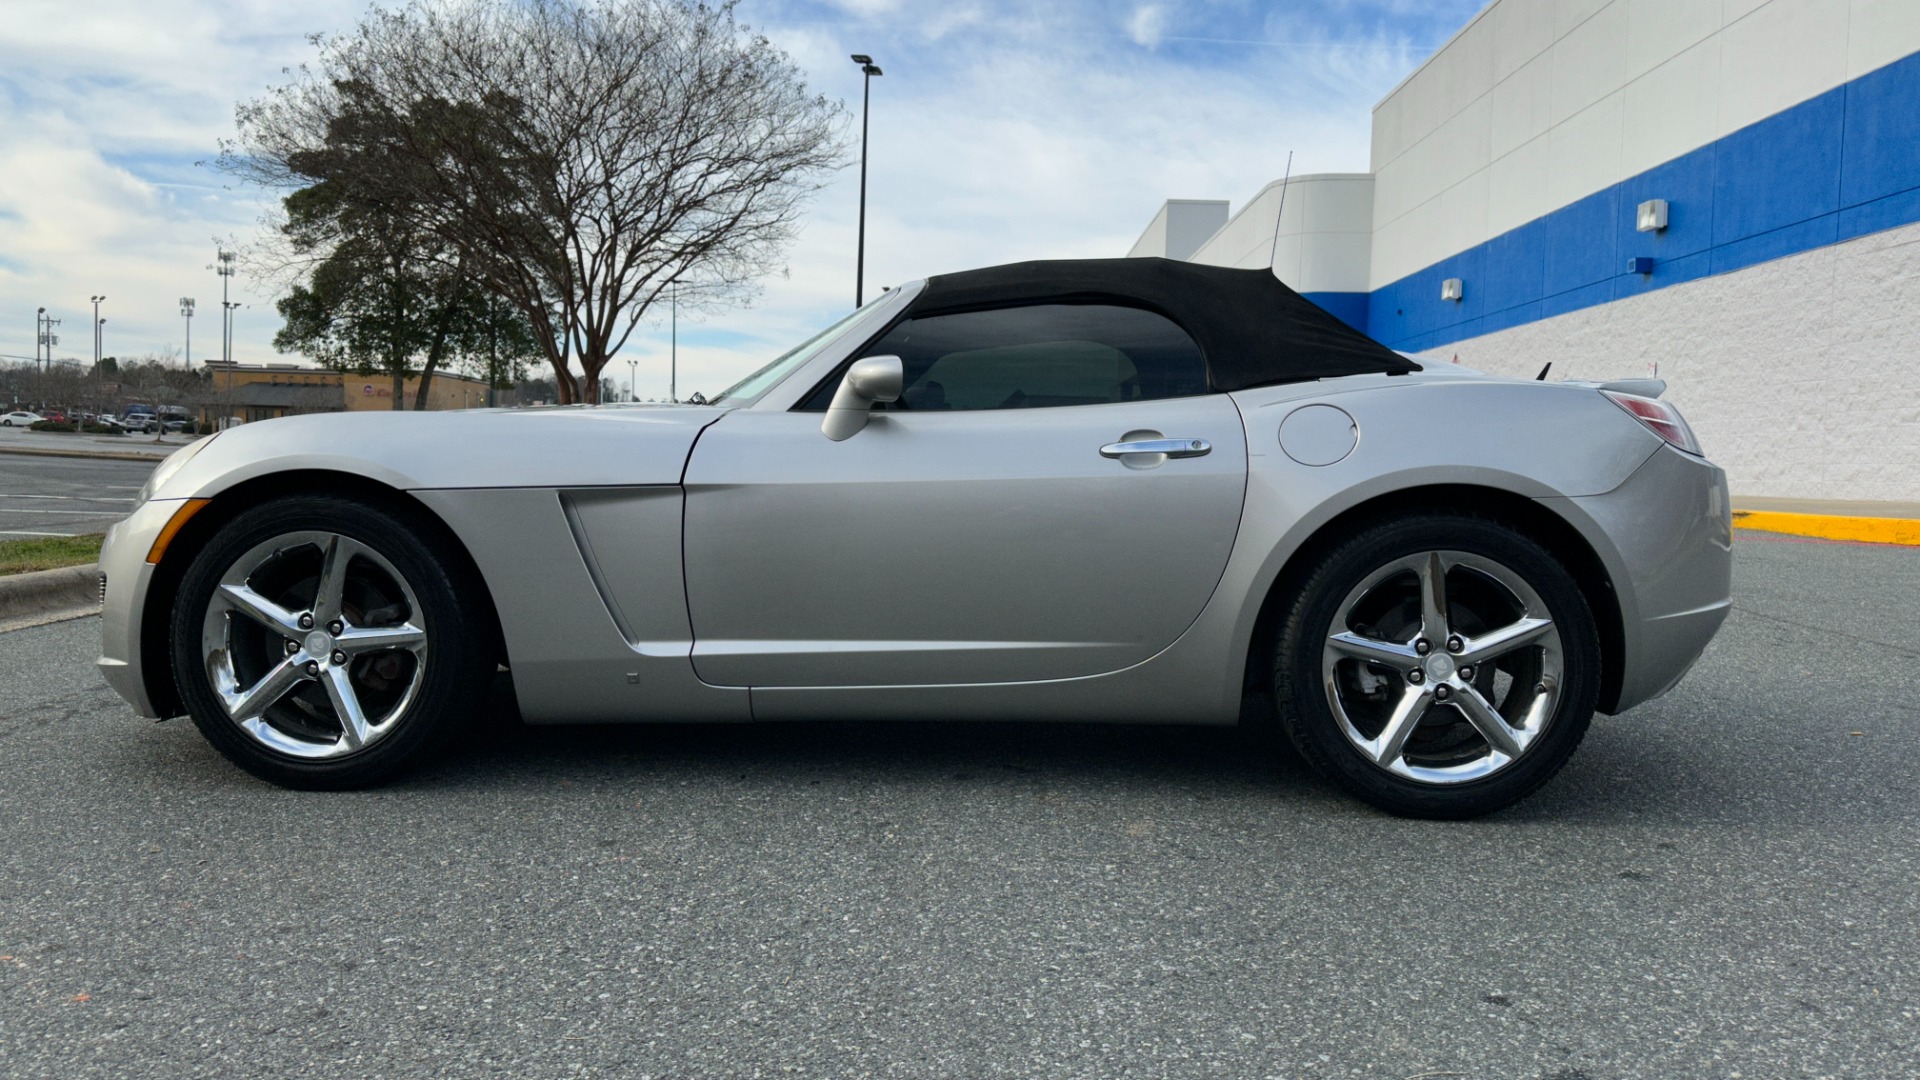 Used 2008 Saturn Sky CONVERTIBLE / MONSOON AUDIO / AUTOMATIC / PREMIUM TRIM / SPOILER for sale Sold at Formula Imports in Charlotte NC 28227 7